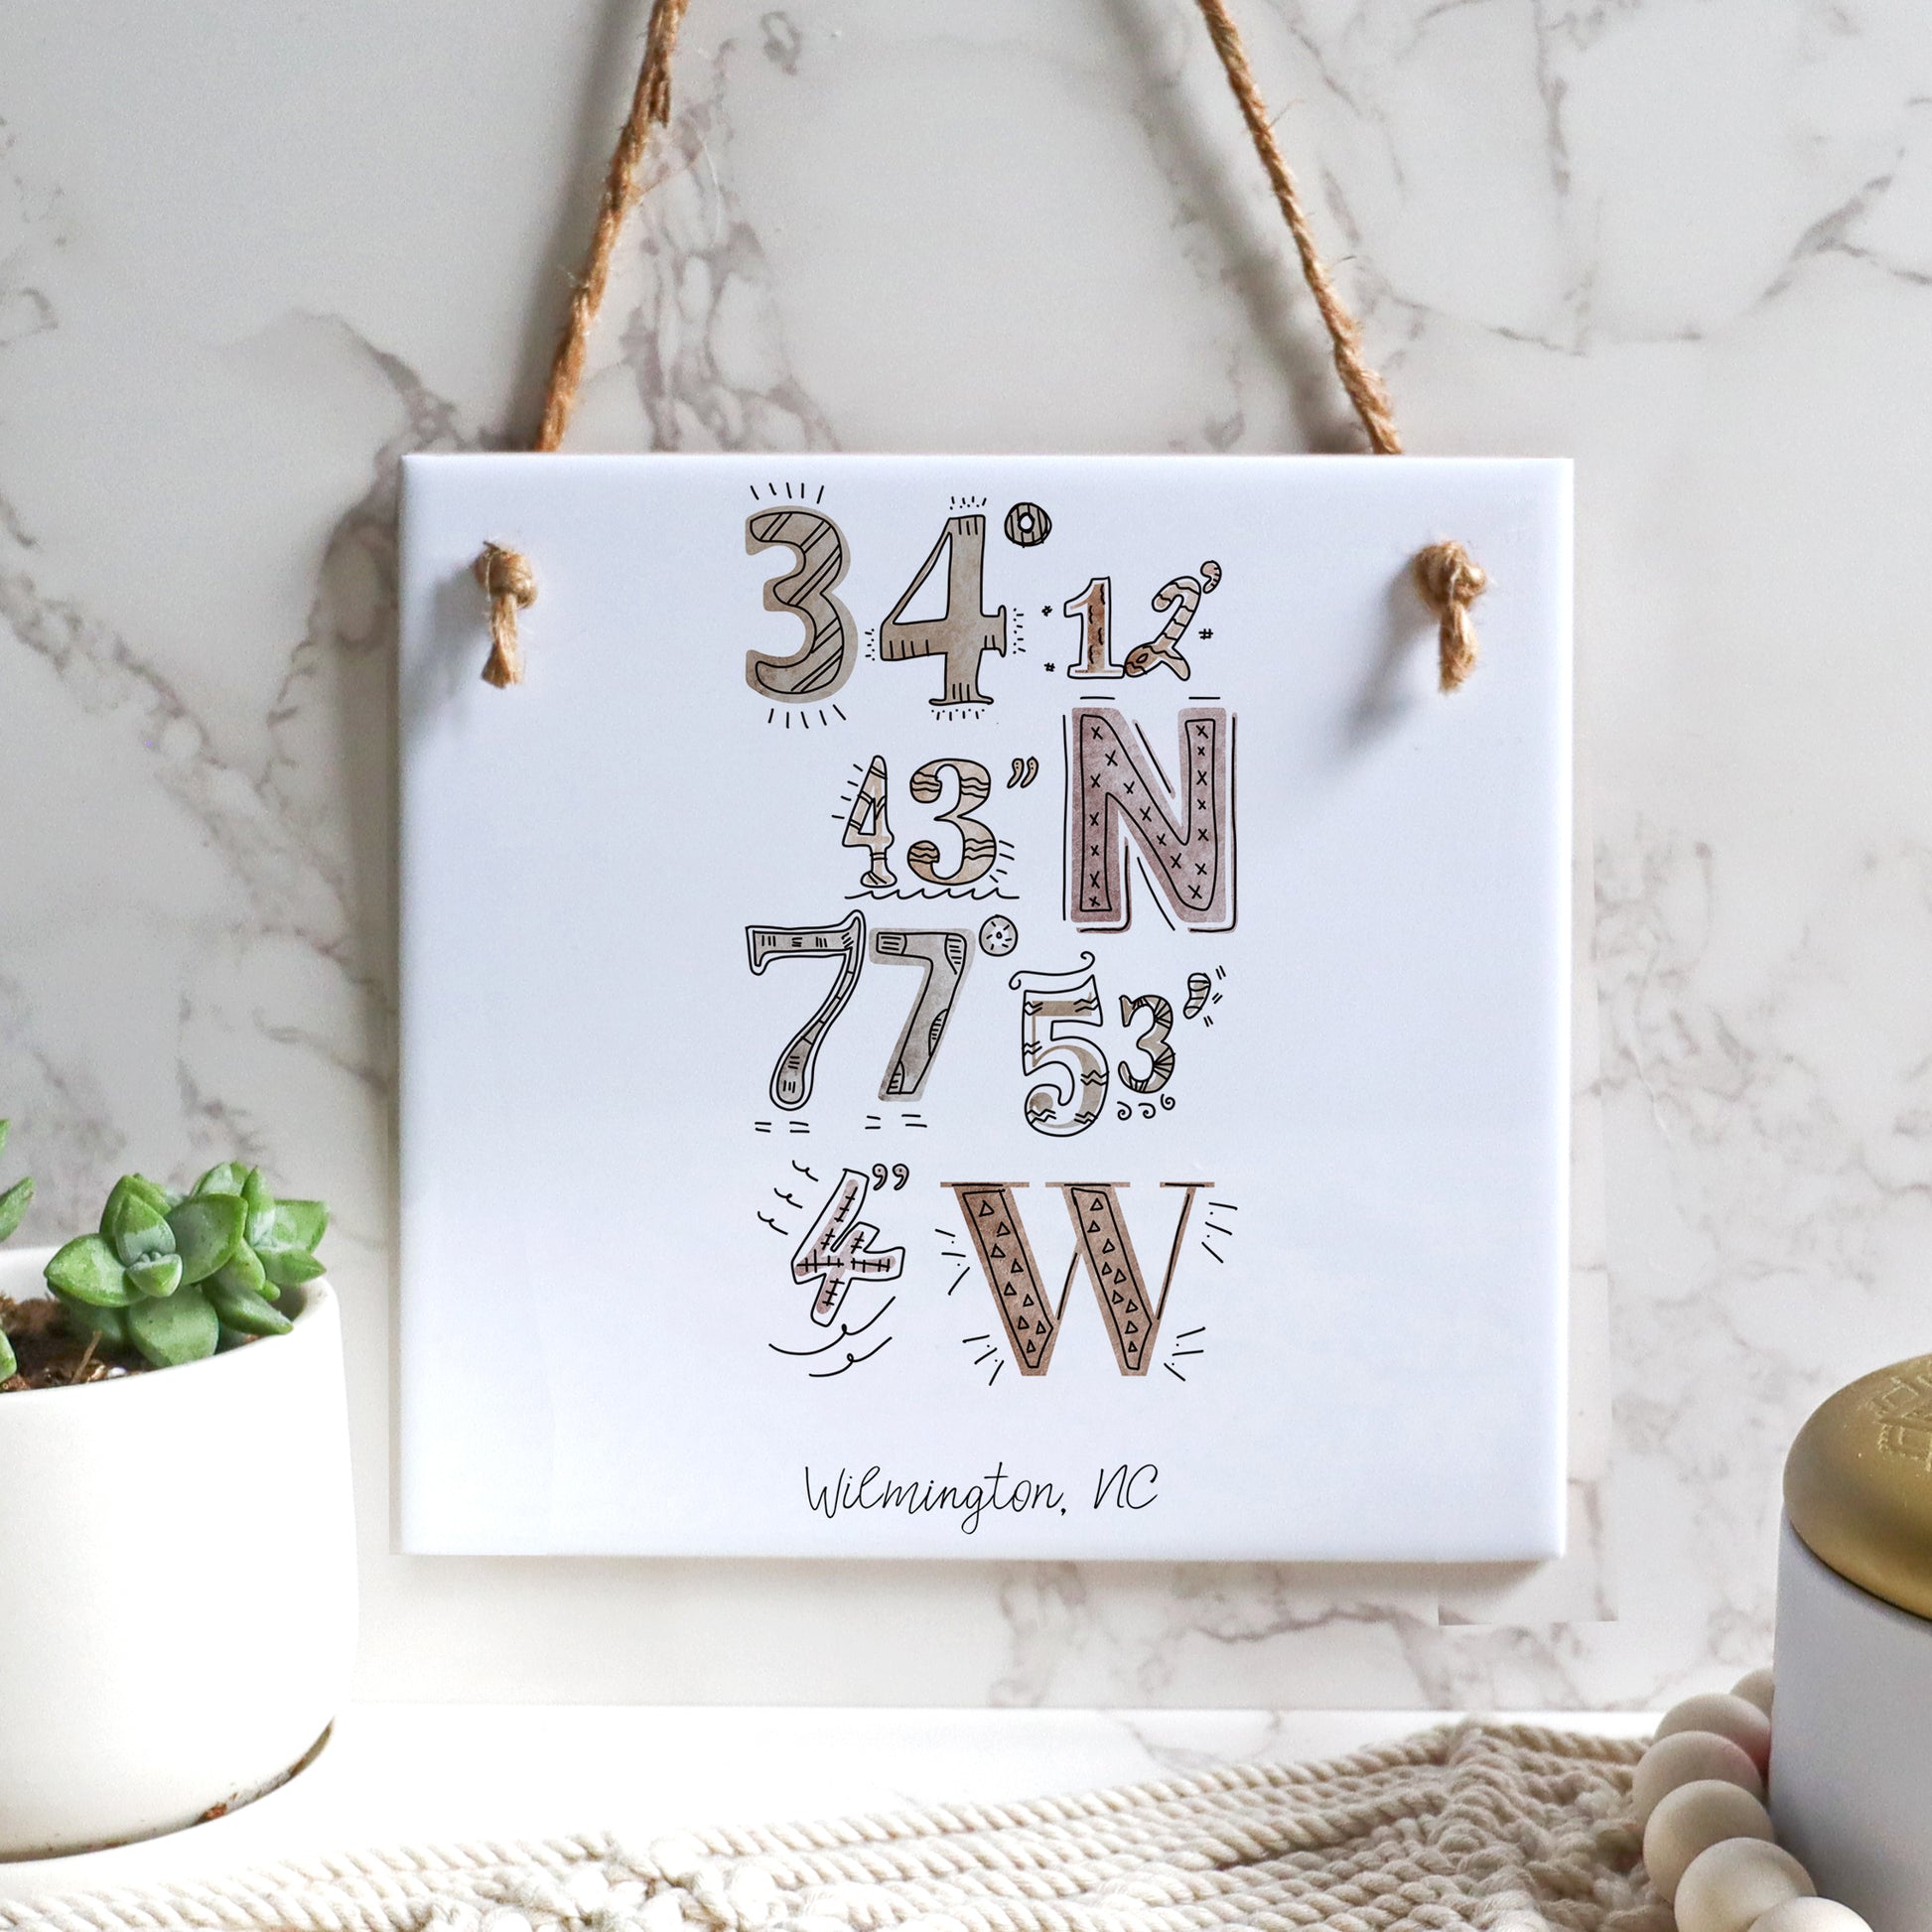 A city art drawing of the Wilmington North Carolina coordinates, on a square tile sign, hanging on a wall - in the color boho